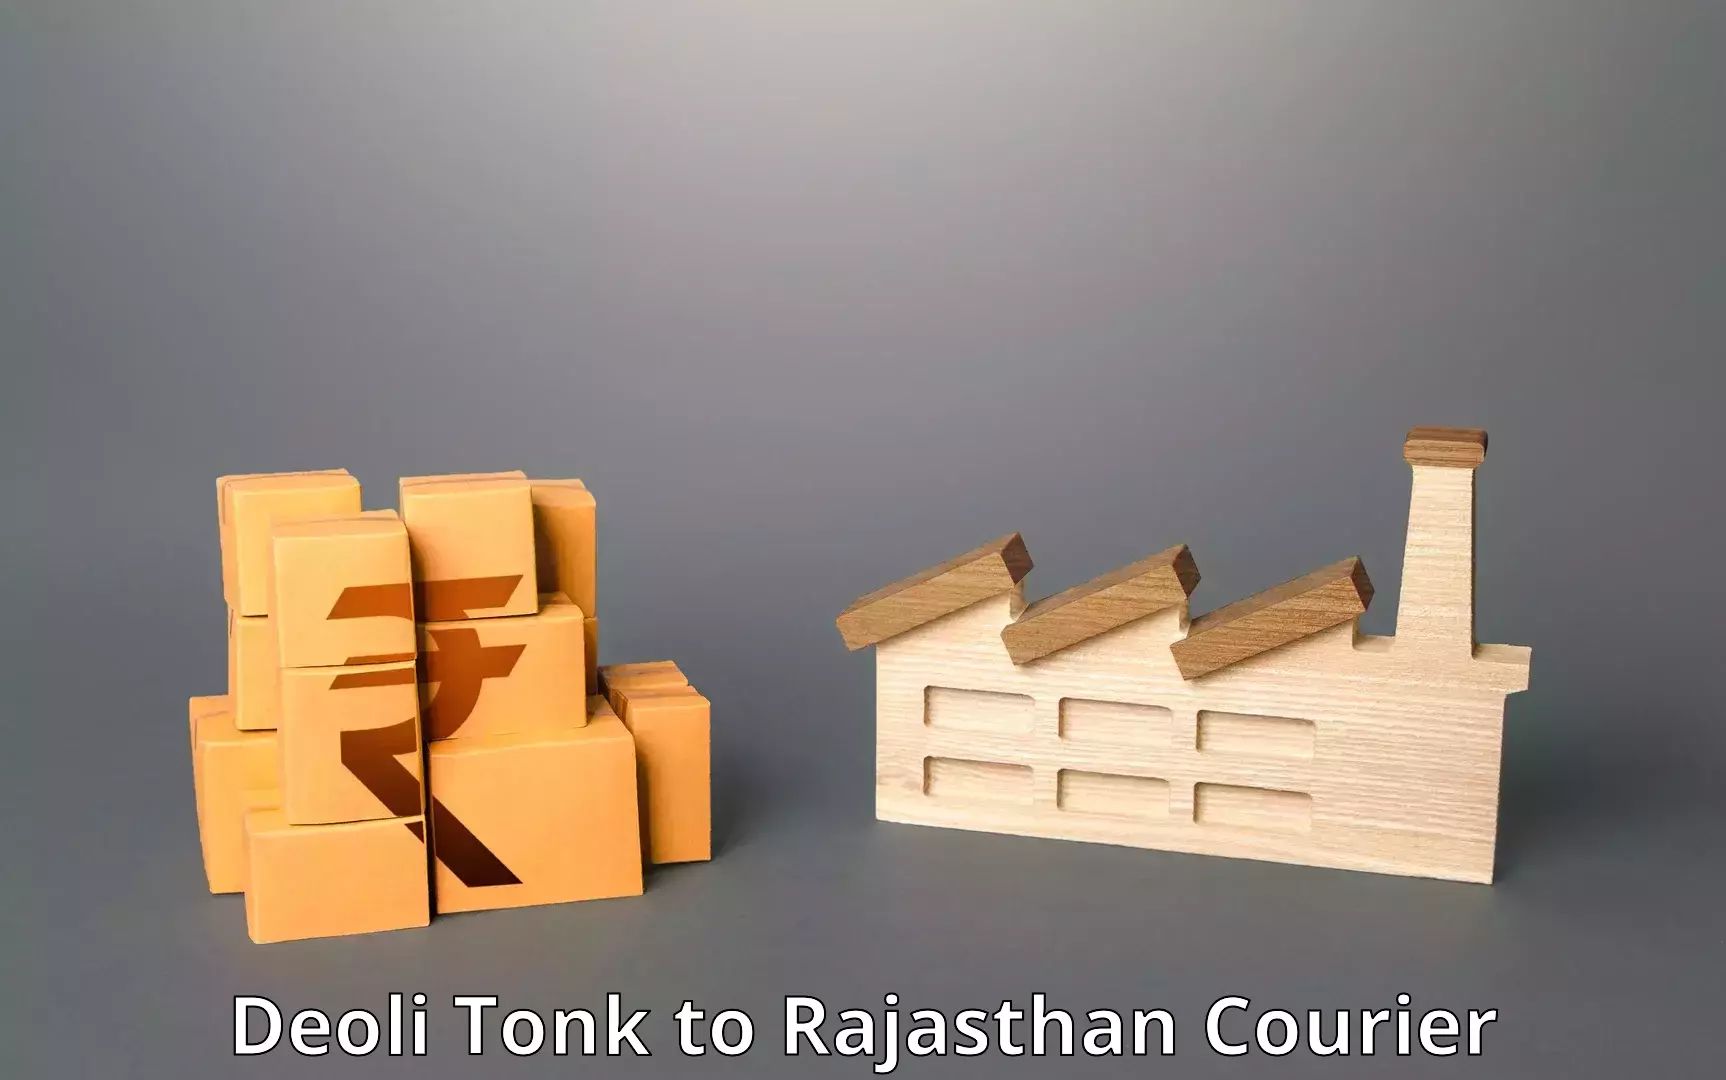 Global shipping networks Deoli Tonk to Rajasthan